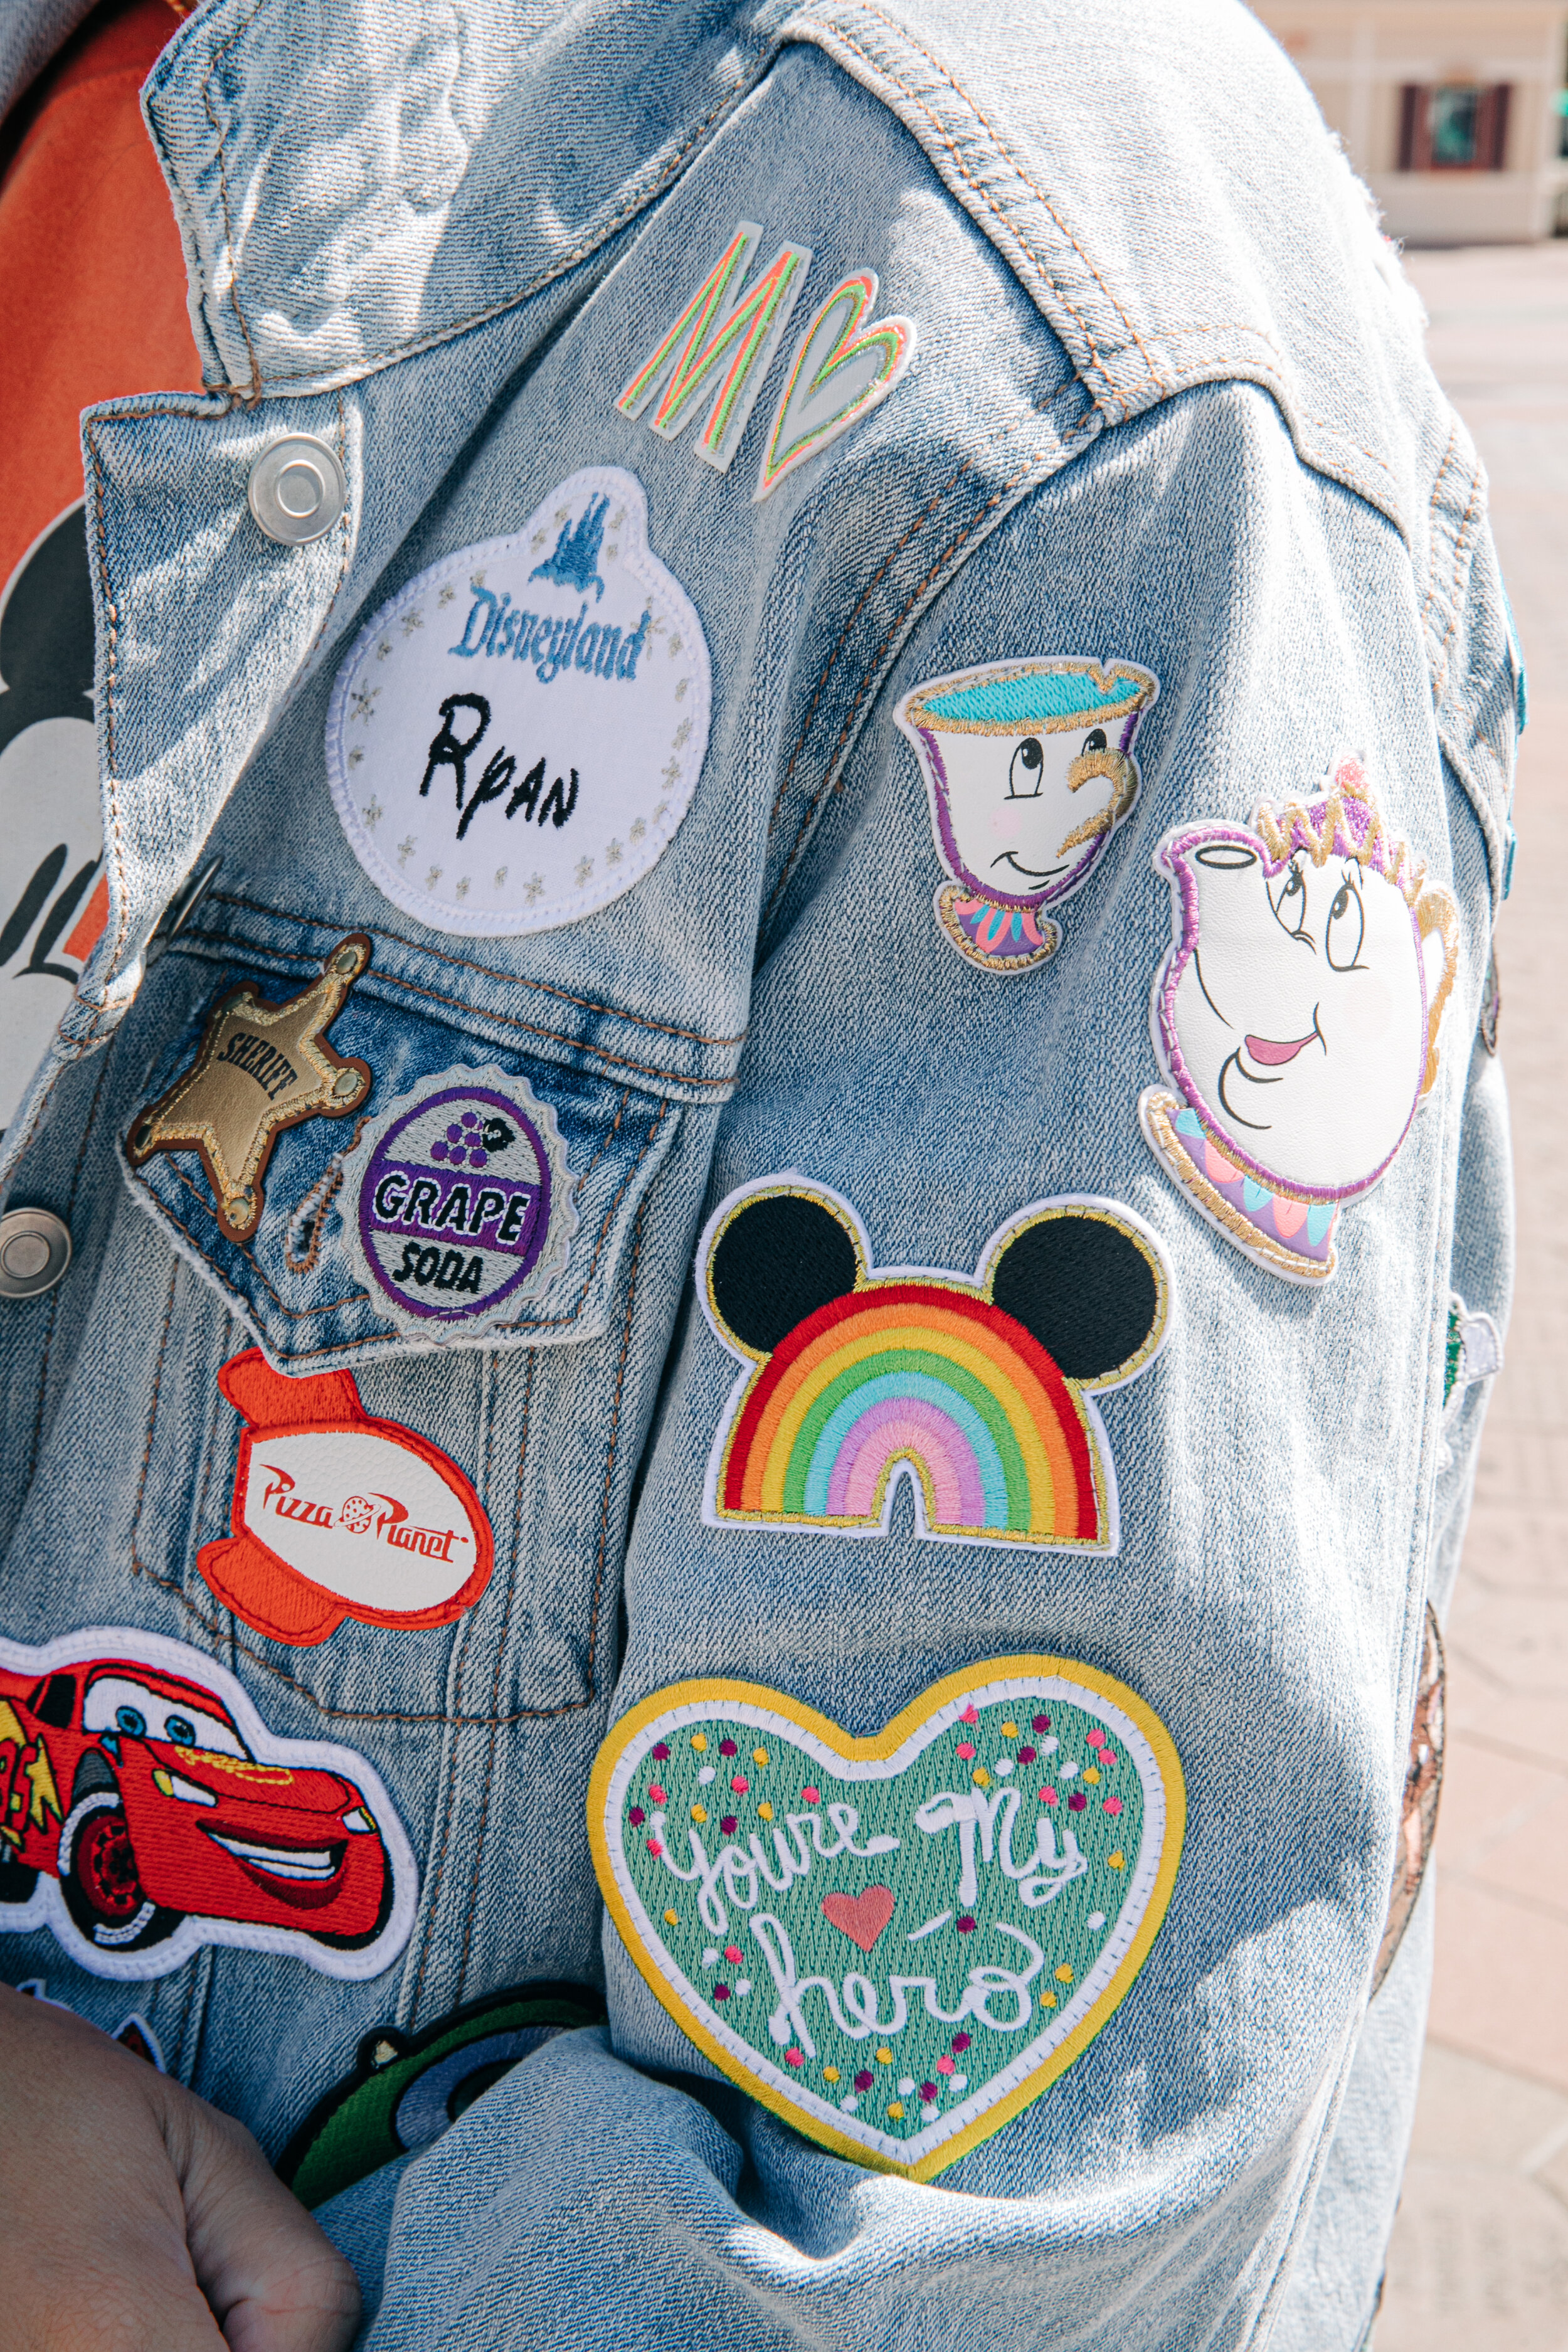 The All New Mickey Mouse Club MMC Patch Set – Disney Parks